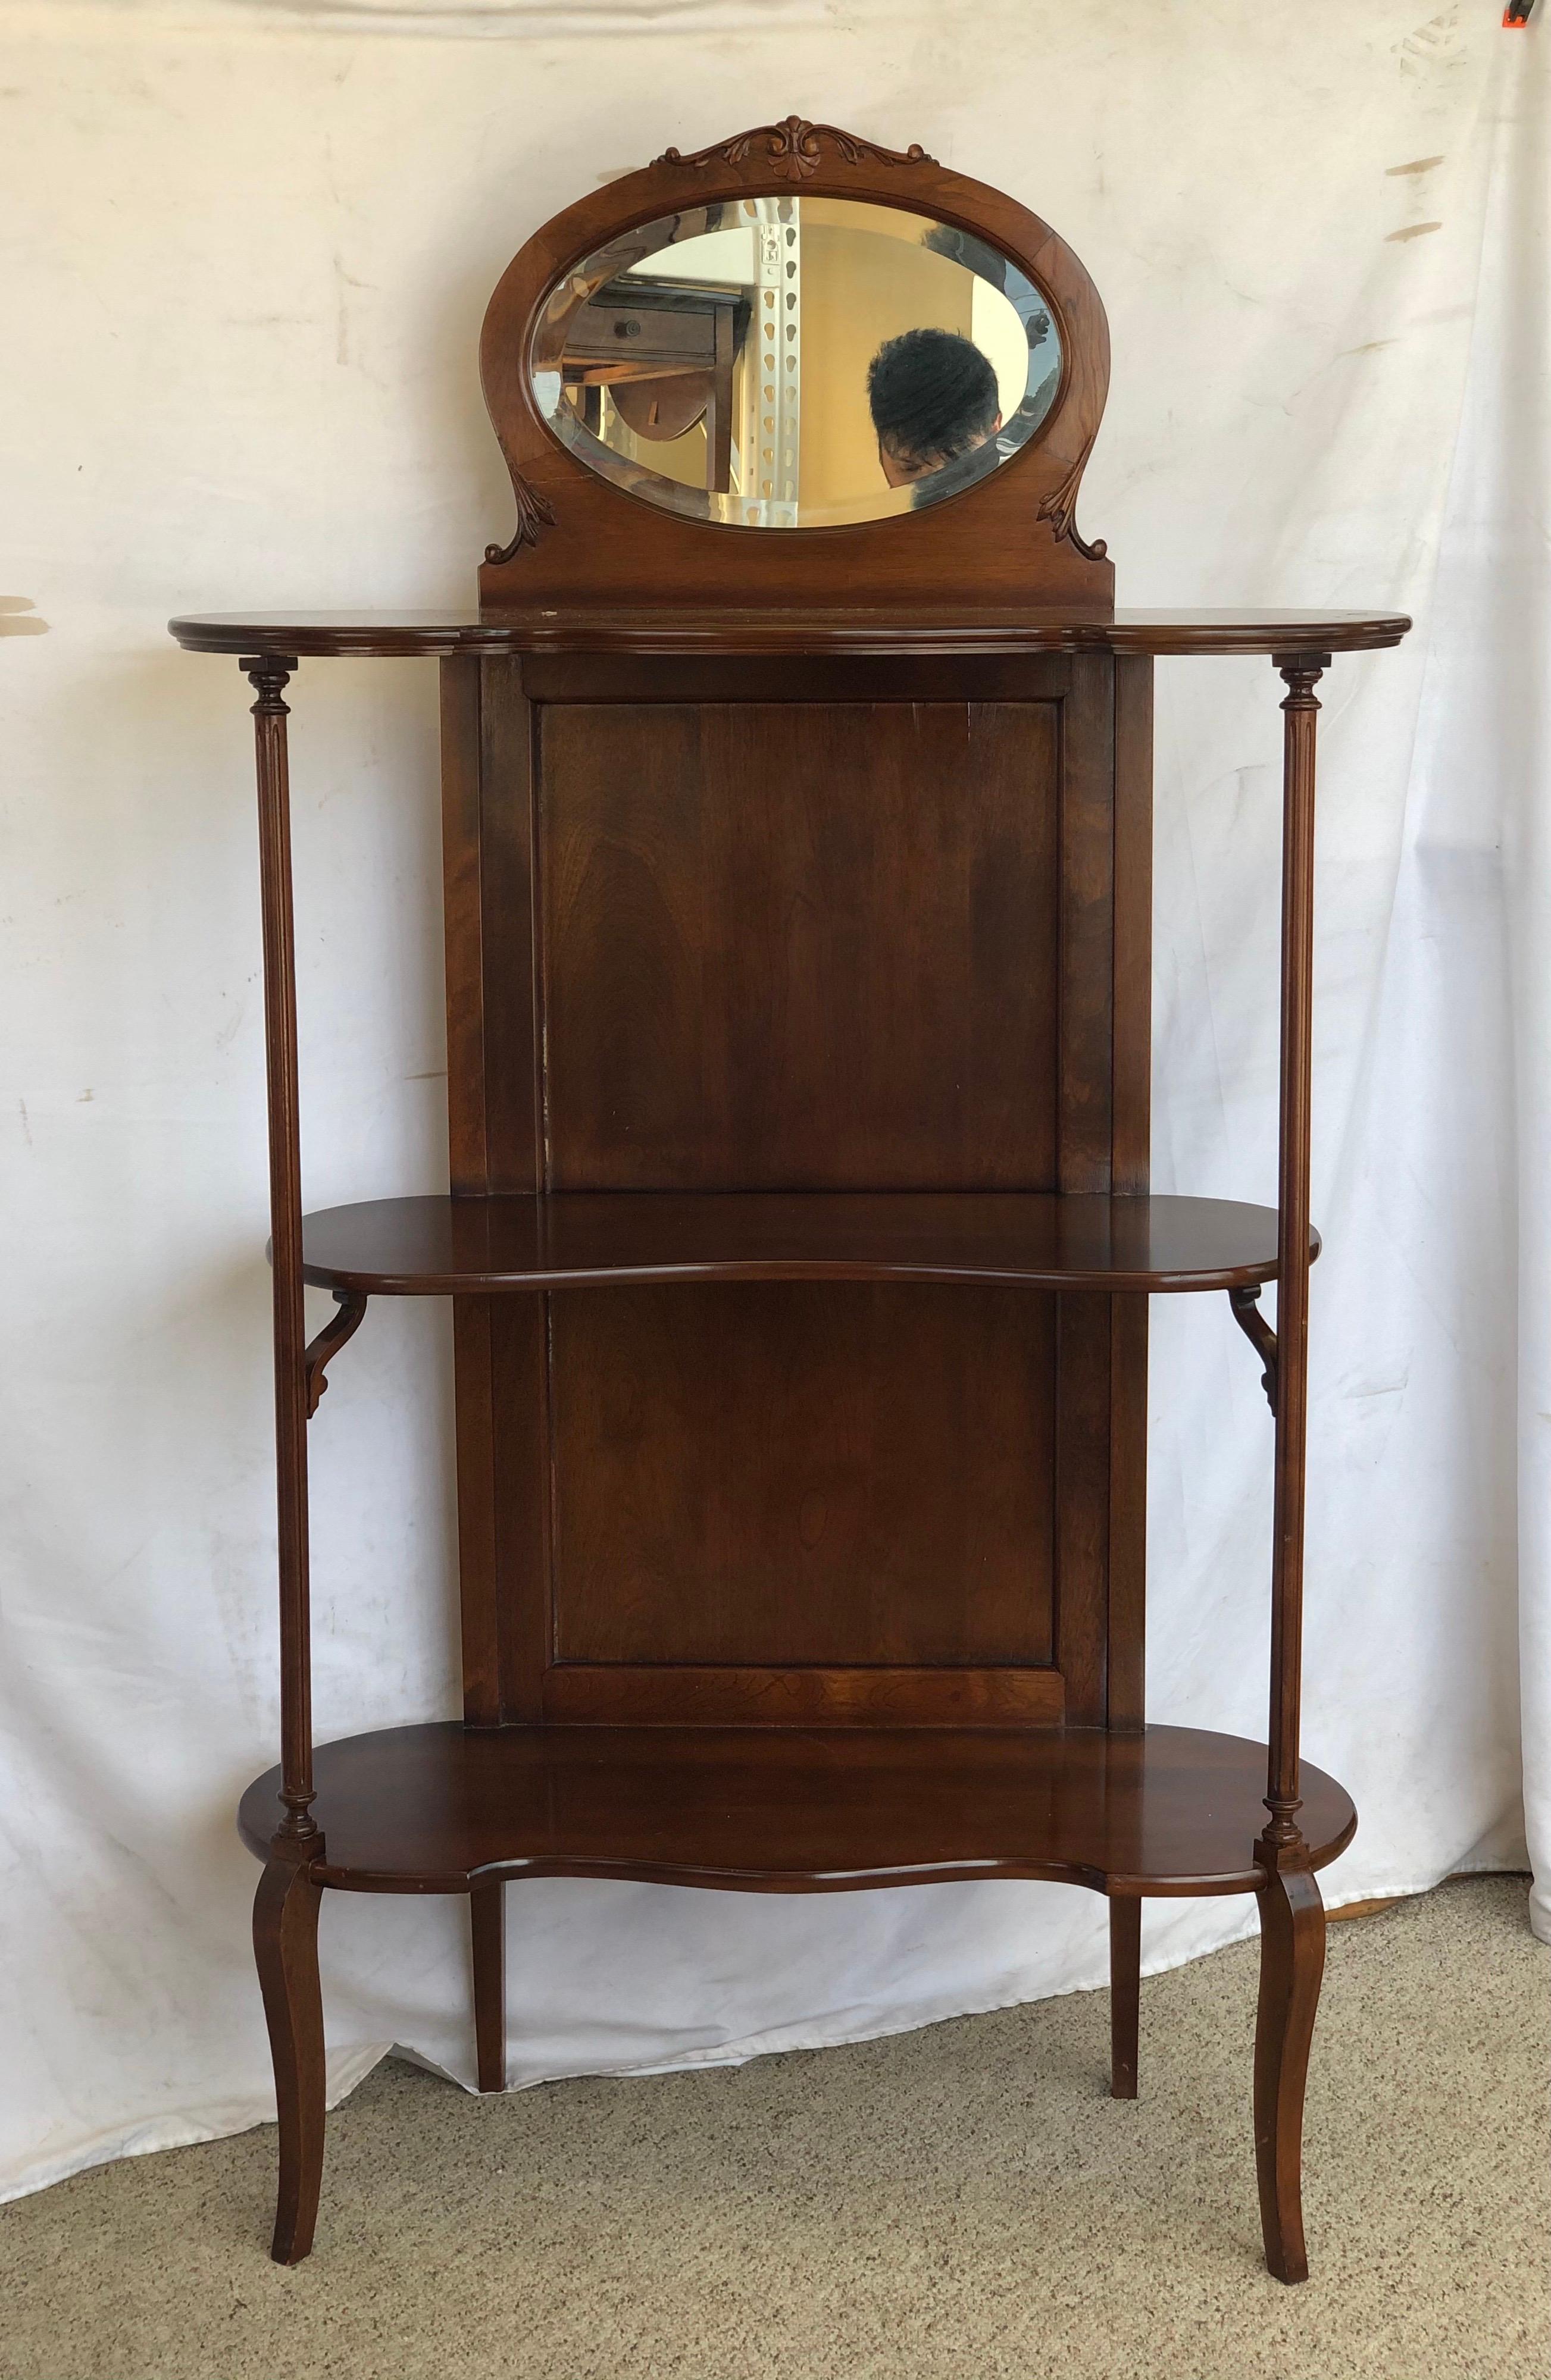 Vintage etagere or hall stand with three shelves and beveled mirror. 

Dimensions Overall: 34W 13D 61H 
46.75H (without Mirror).